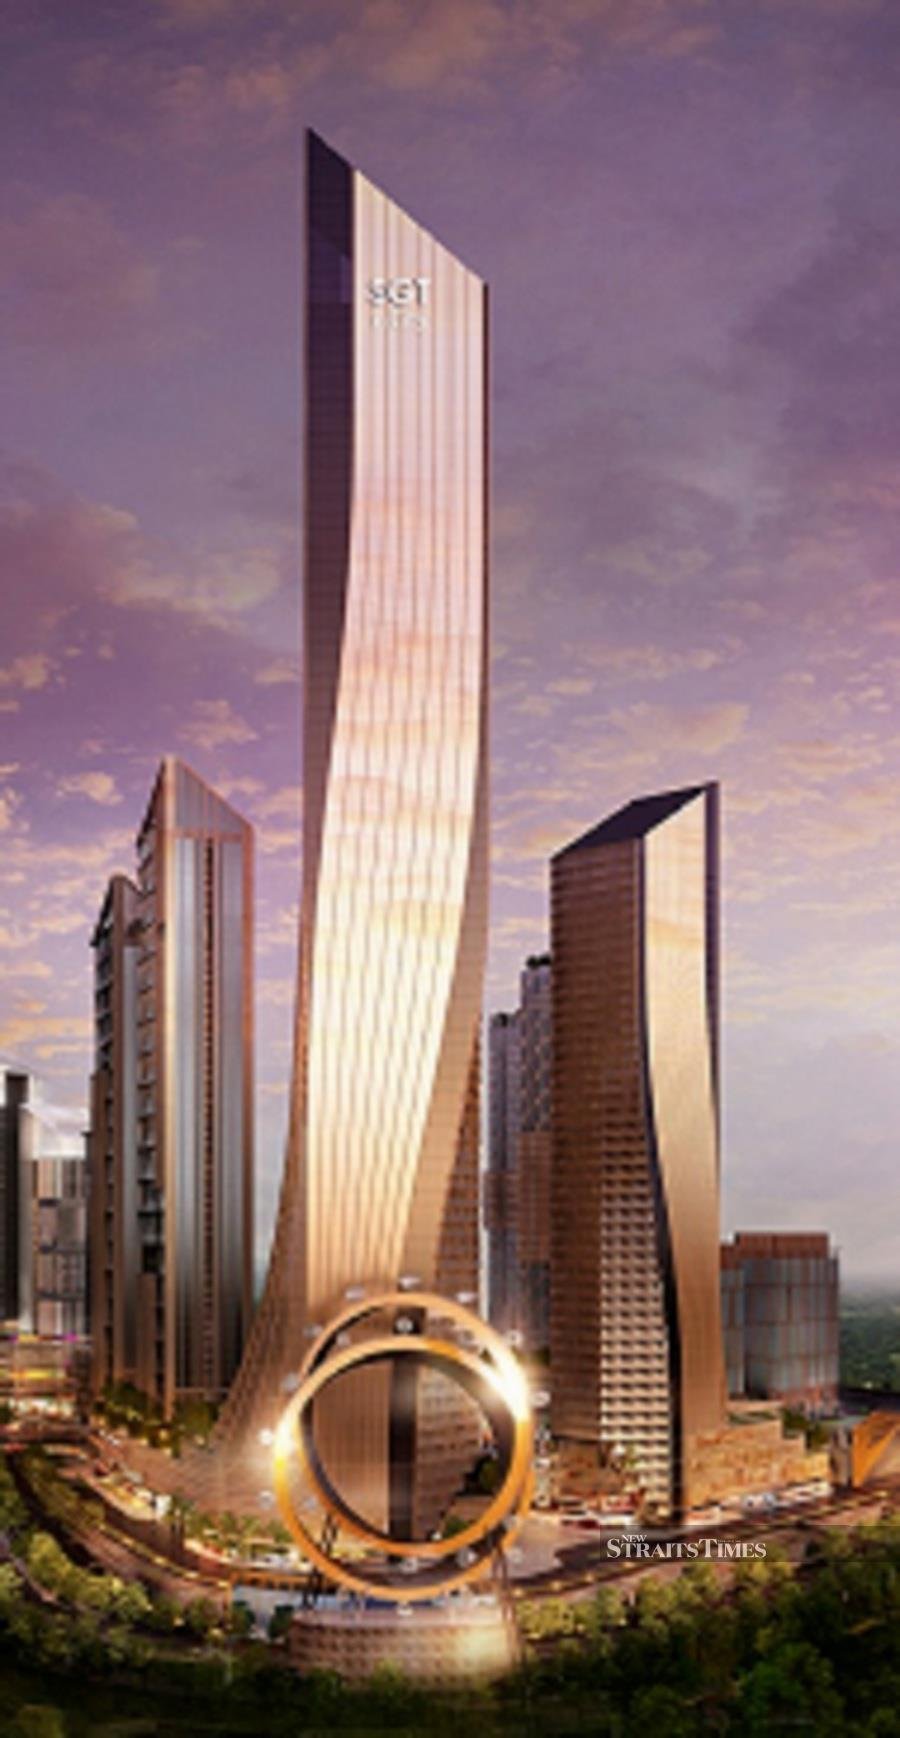 An artist's impression of the iconic 78-storey IGT Tower